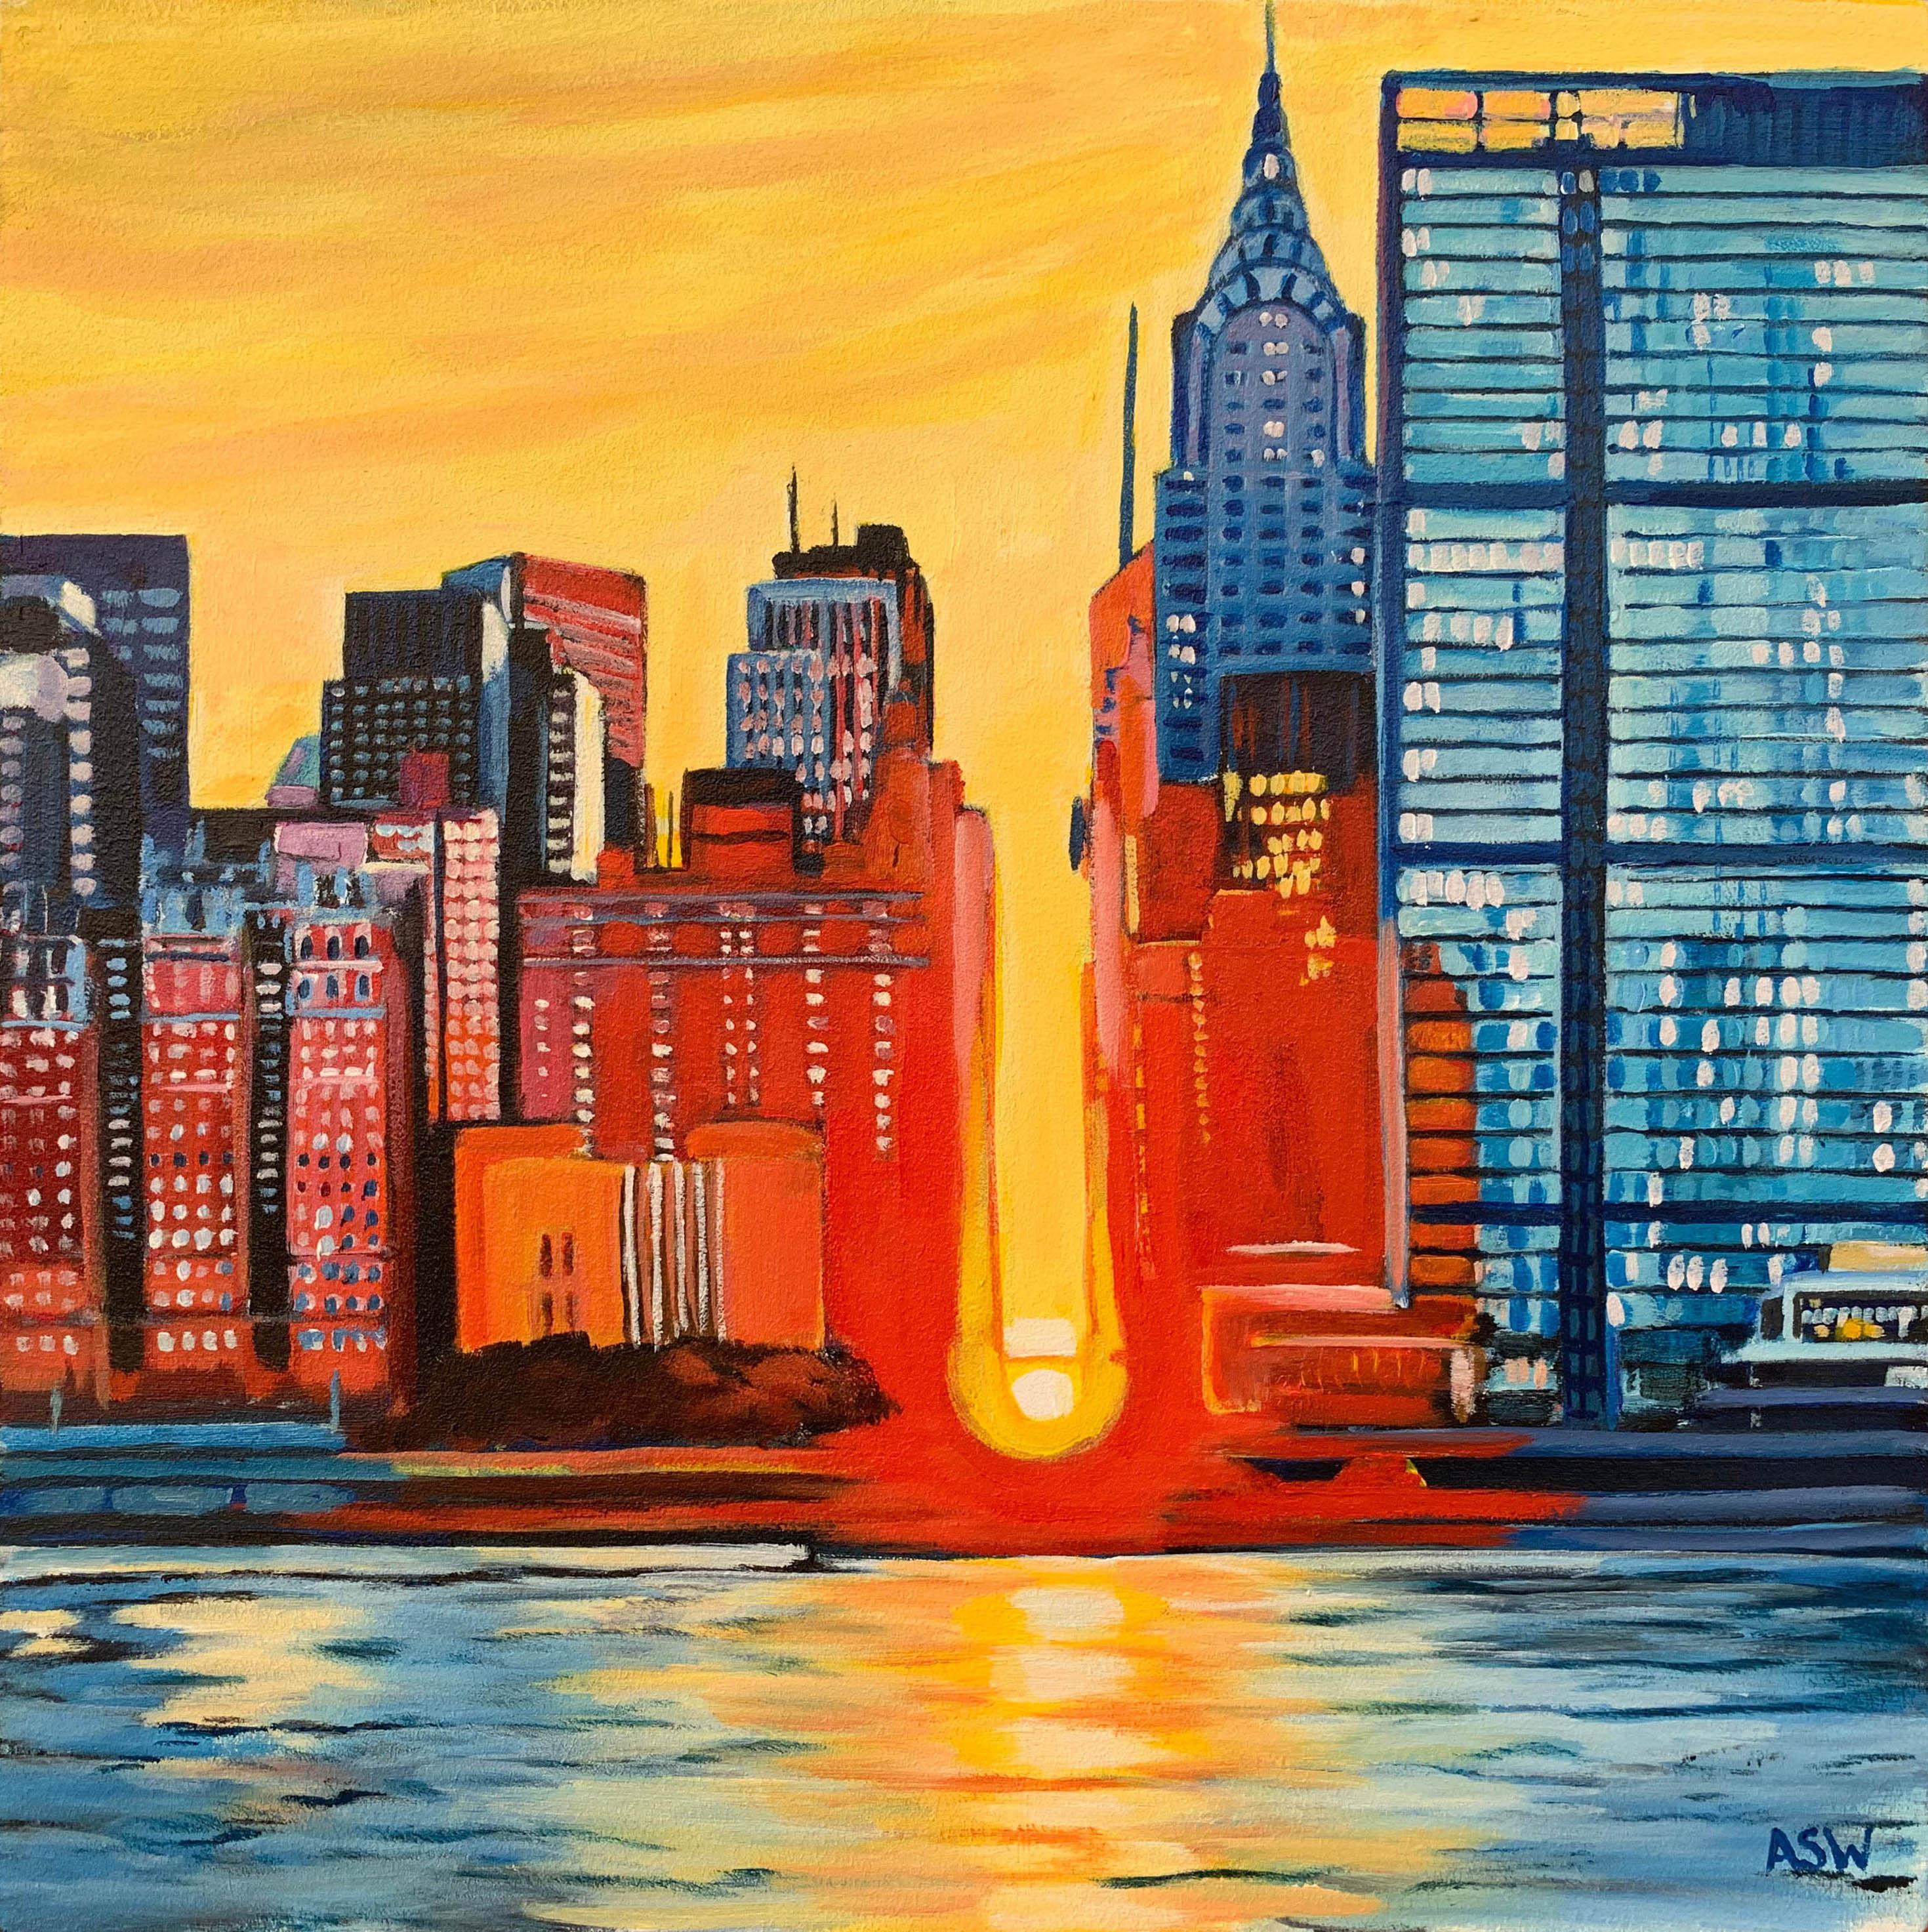 Contemporary Realism of New York City USA Sunset by leading British Urban Cityscape Artist Angela Wakefield. 

Art measures 13 x 13 inches
Frame measures 19 x 19 inches

Angela Wakefield has twice been on the front cover of ‘Art of England’ and